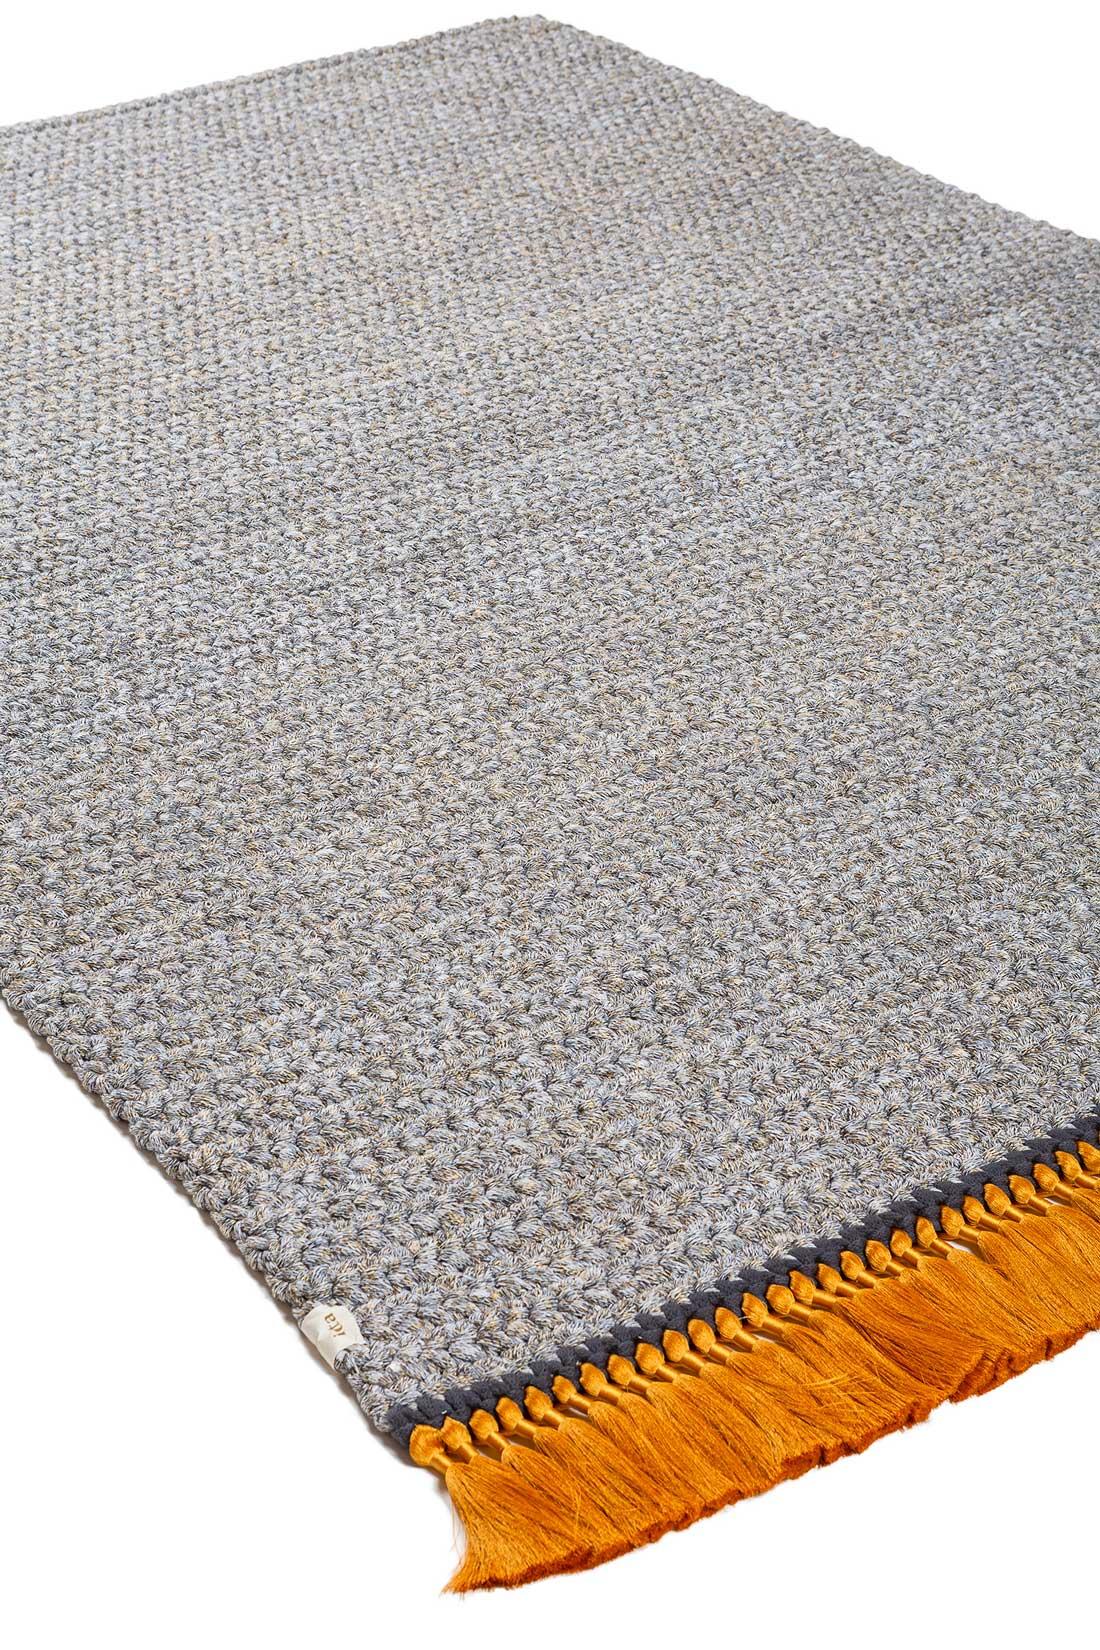 Hand-Crafted Handmade Crochet 200x300 Thick Rug in Grey Beige Golden with tassels For Sale